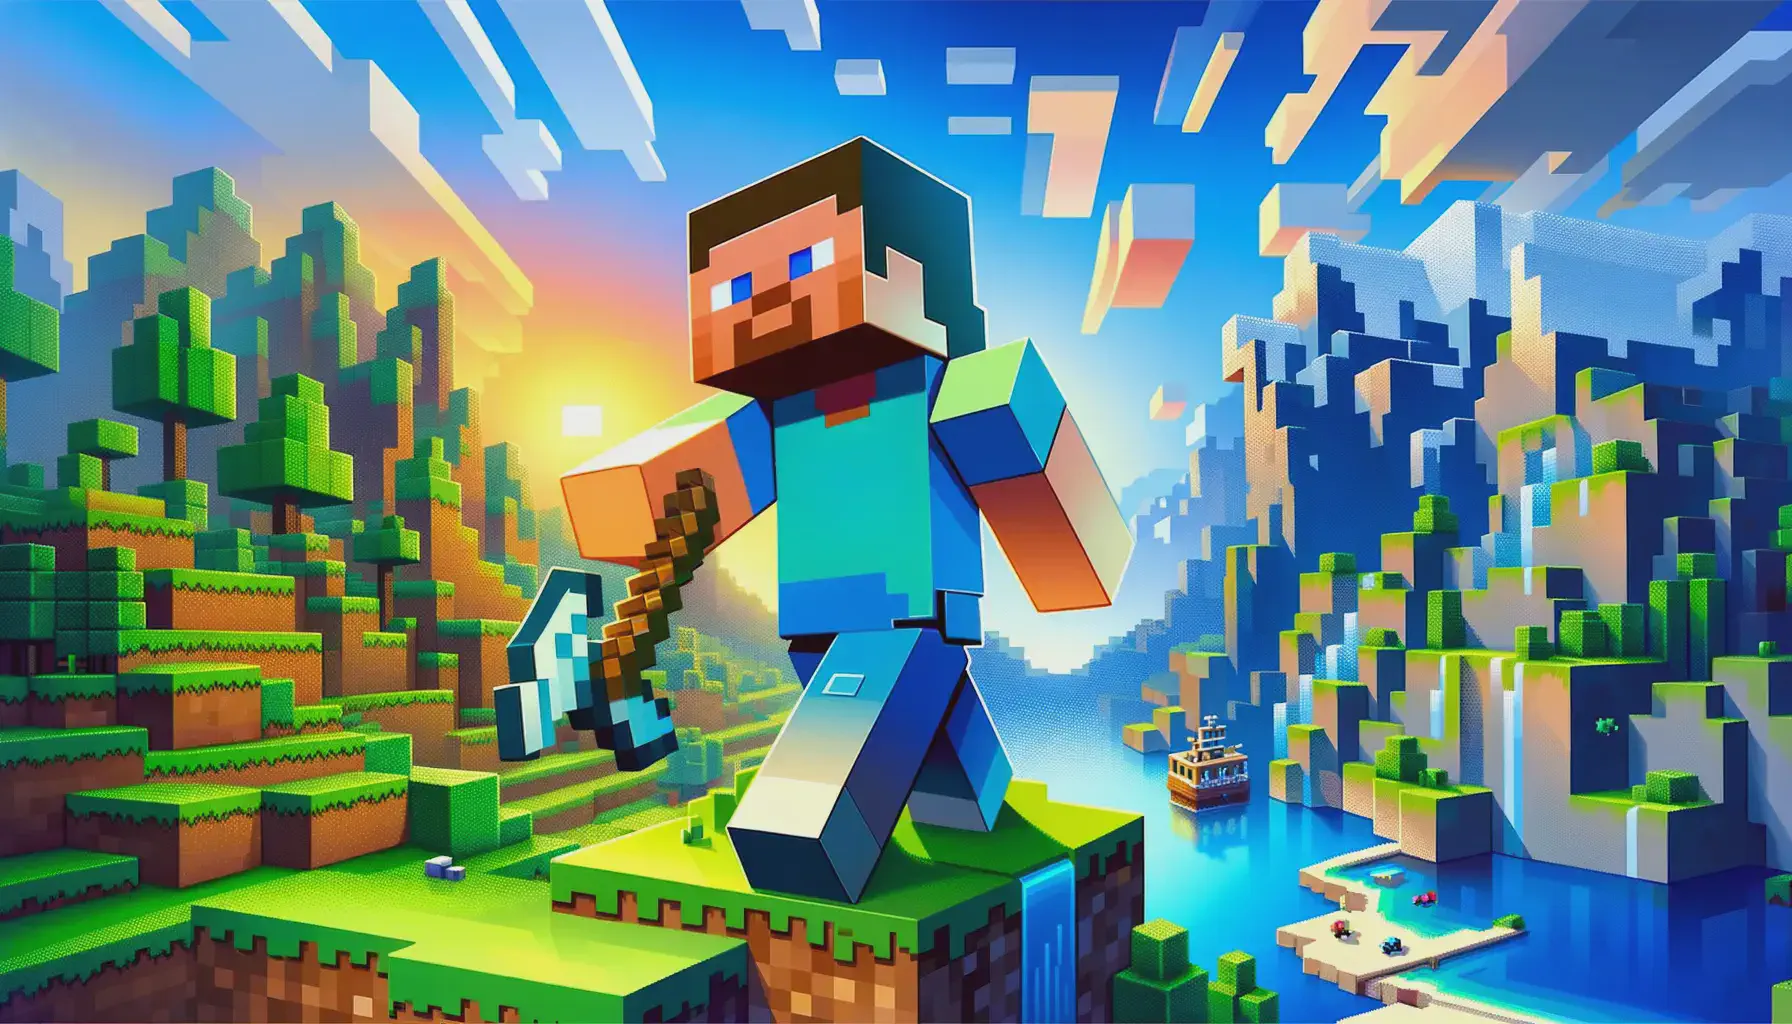 A Minecraft scene with a large character in the foreground.